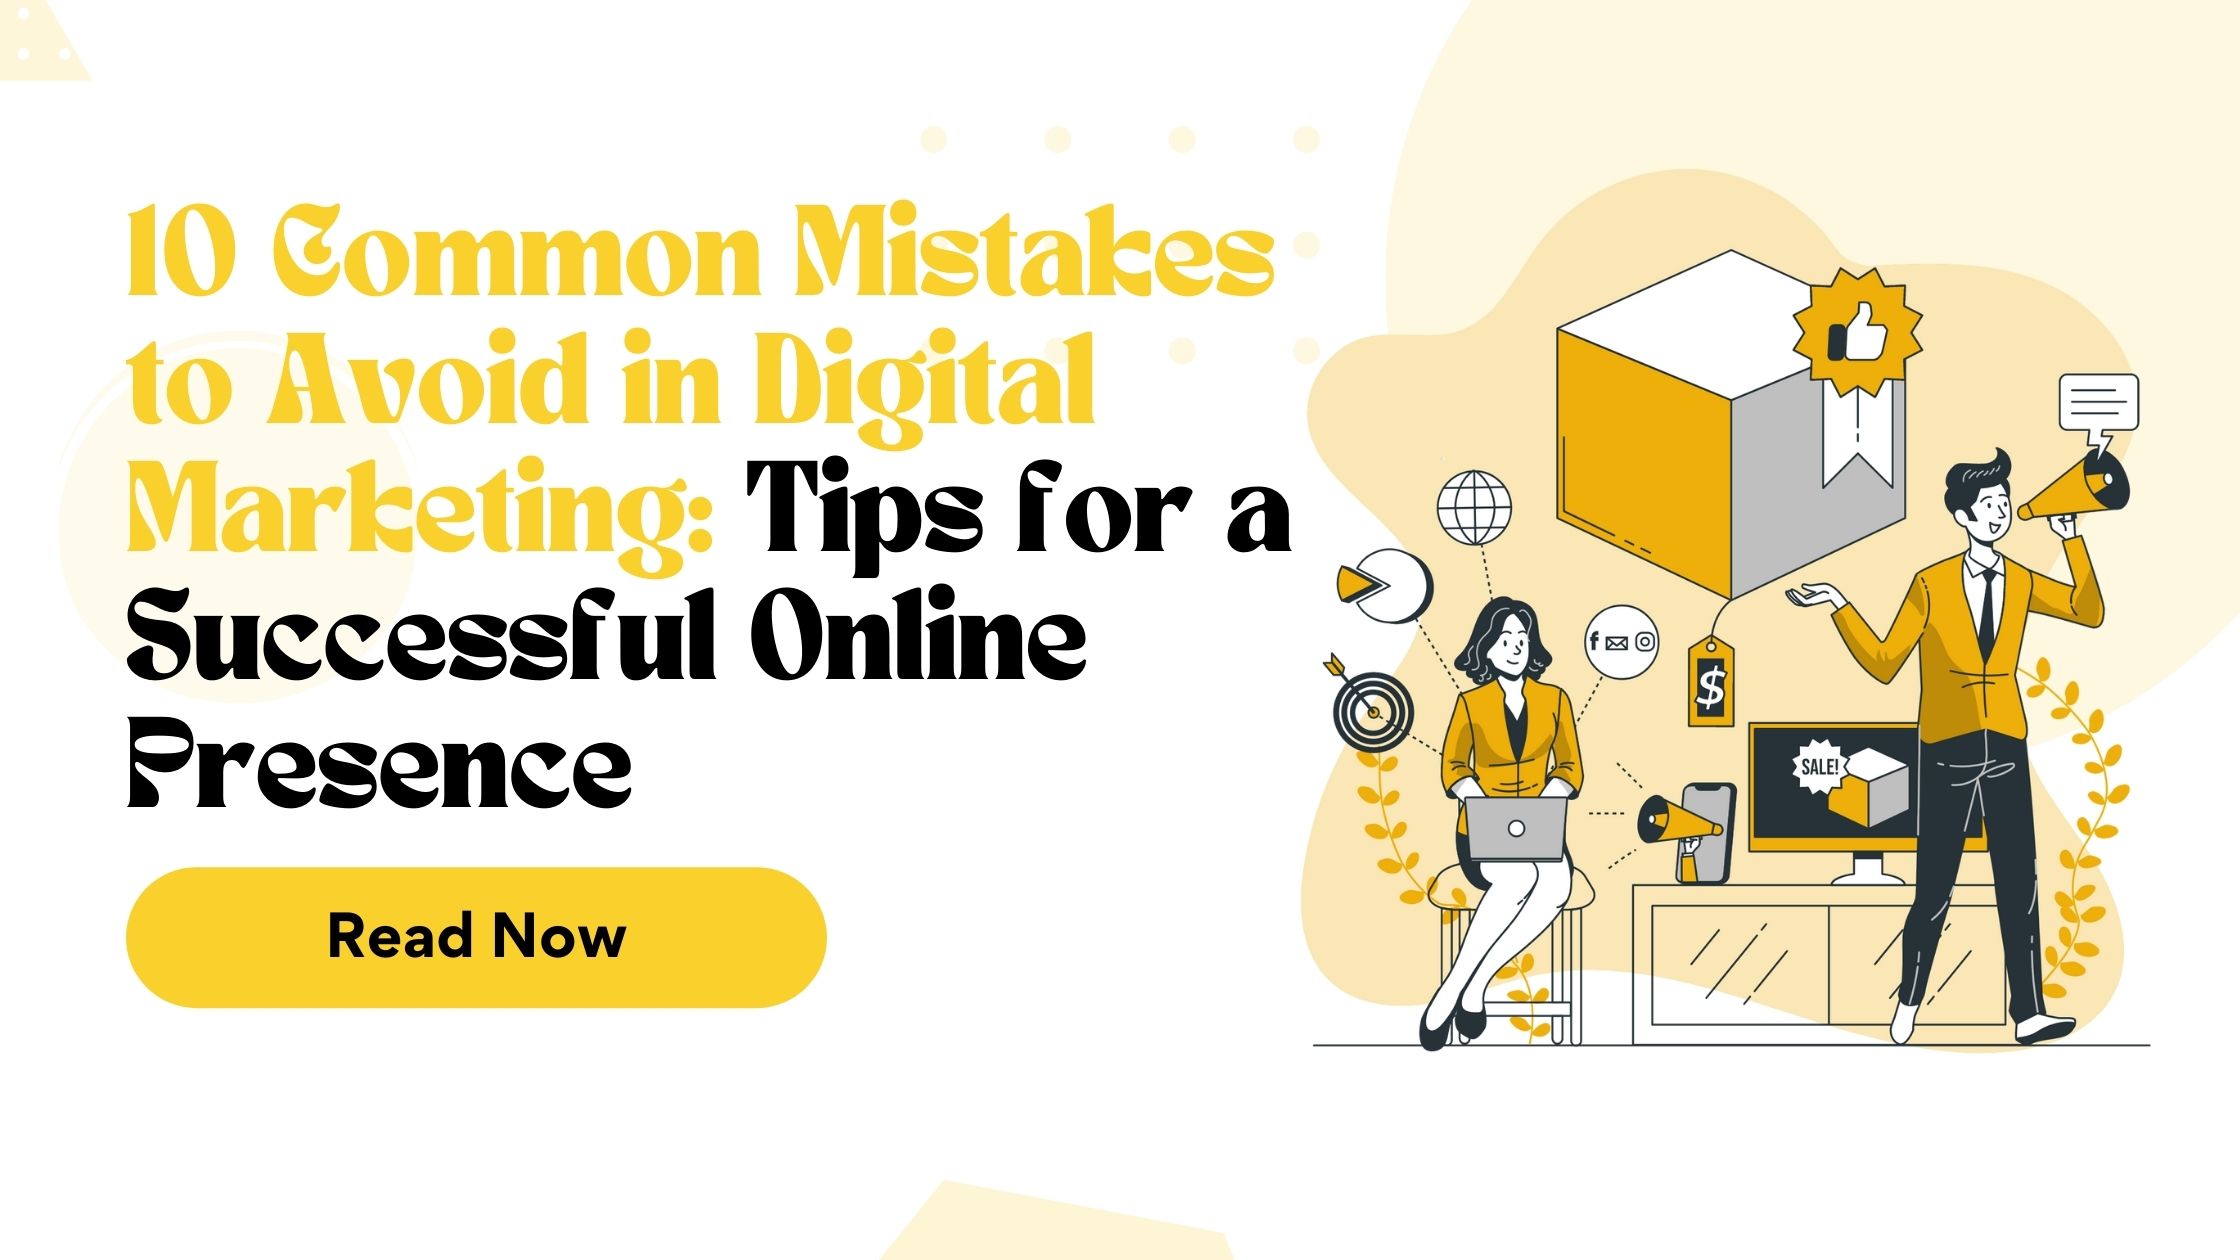 mistakes to avoid in digital marketing